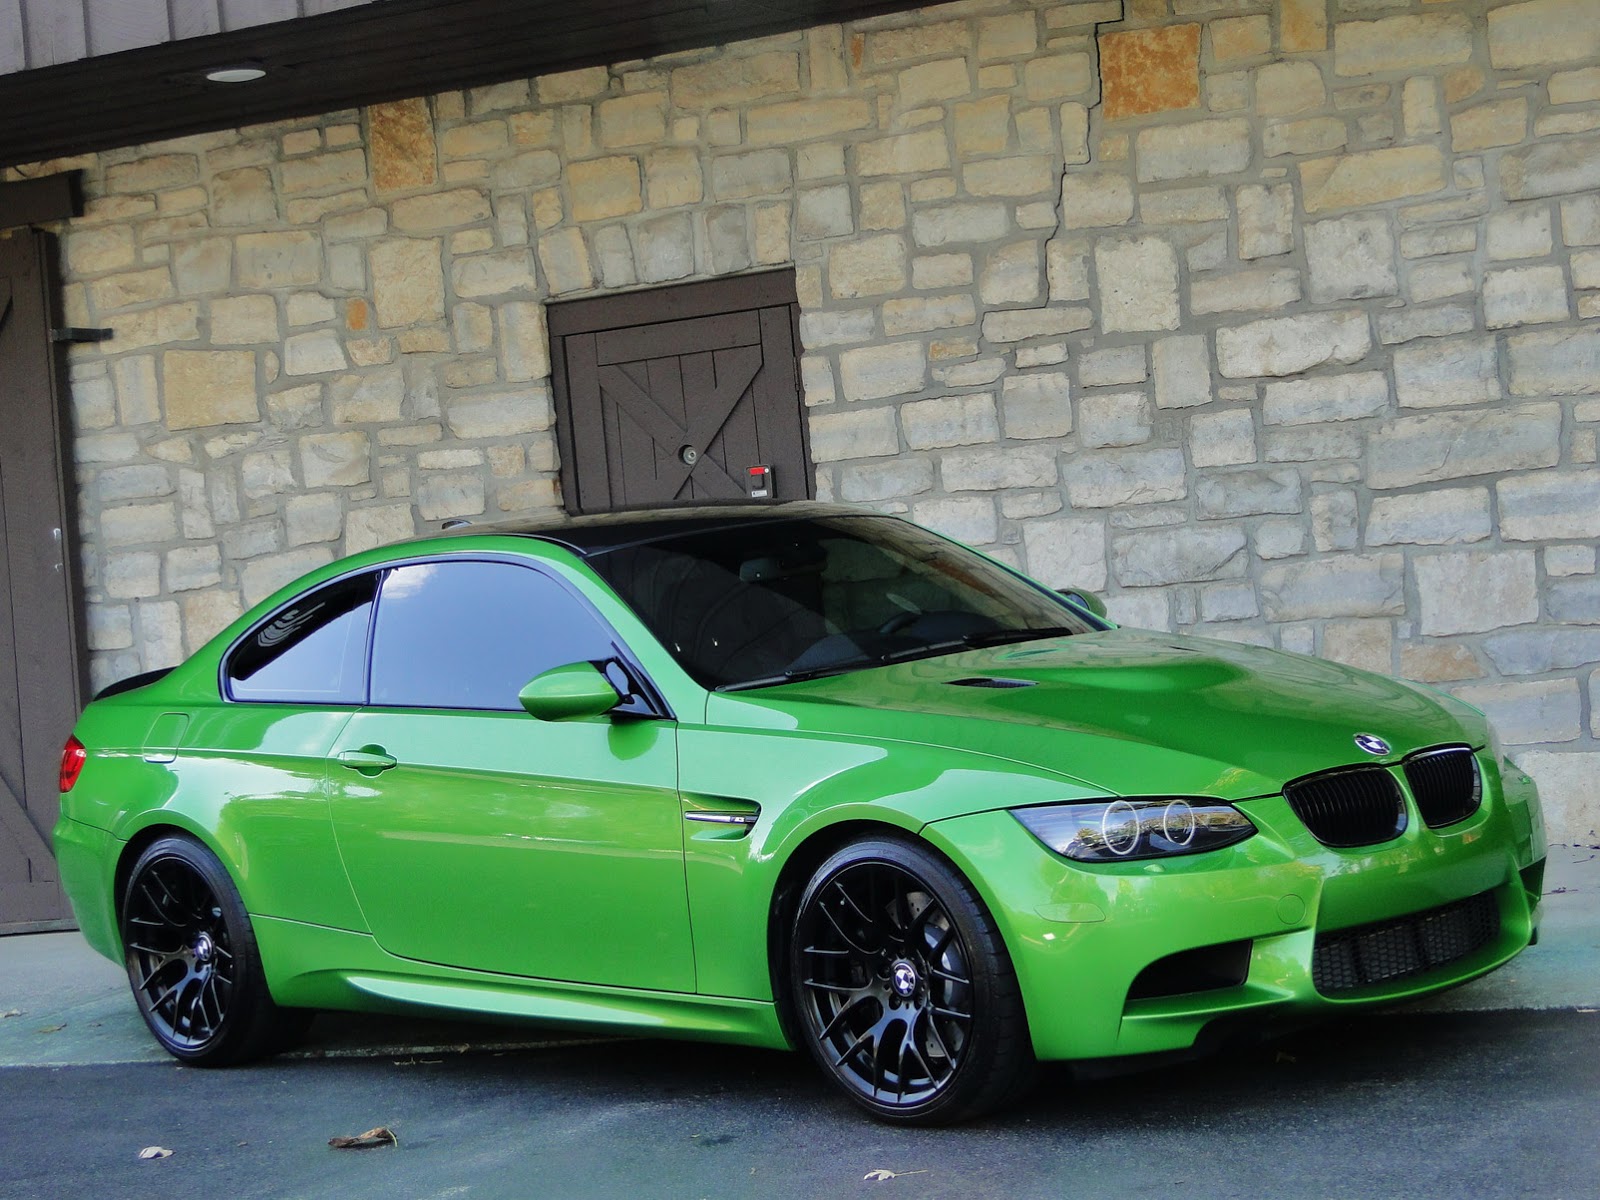 Individual Java Green BMW E92 M3 Up for Sale - autoevolution